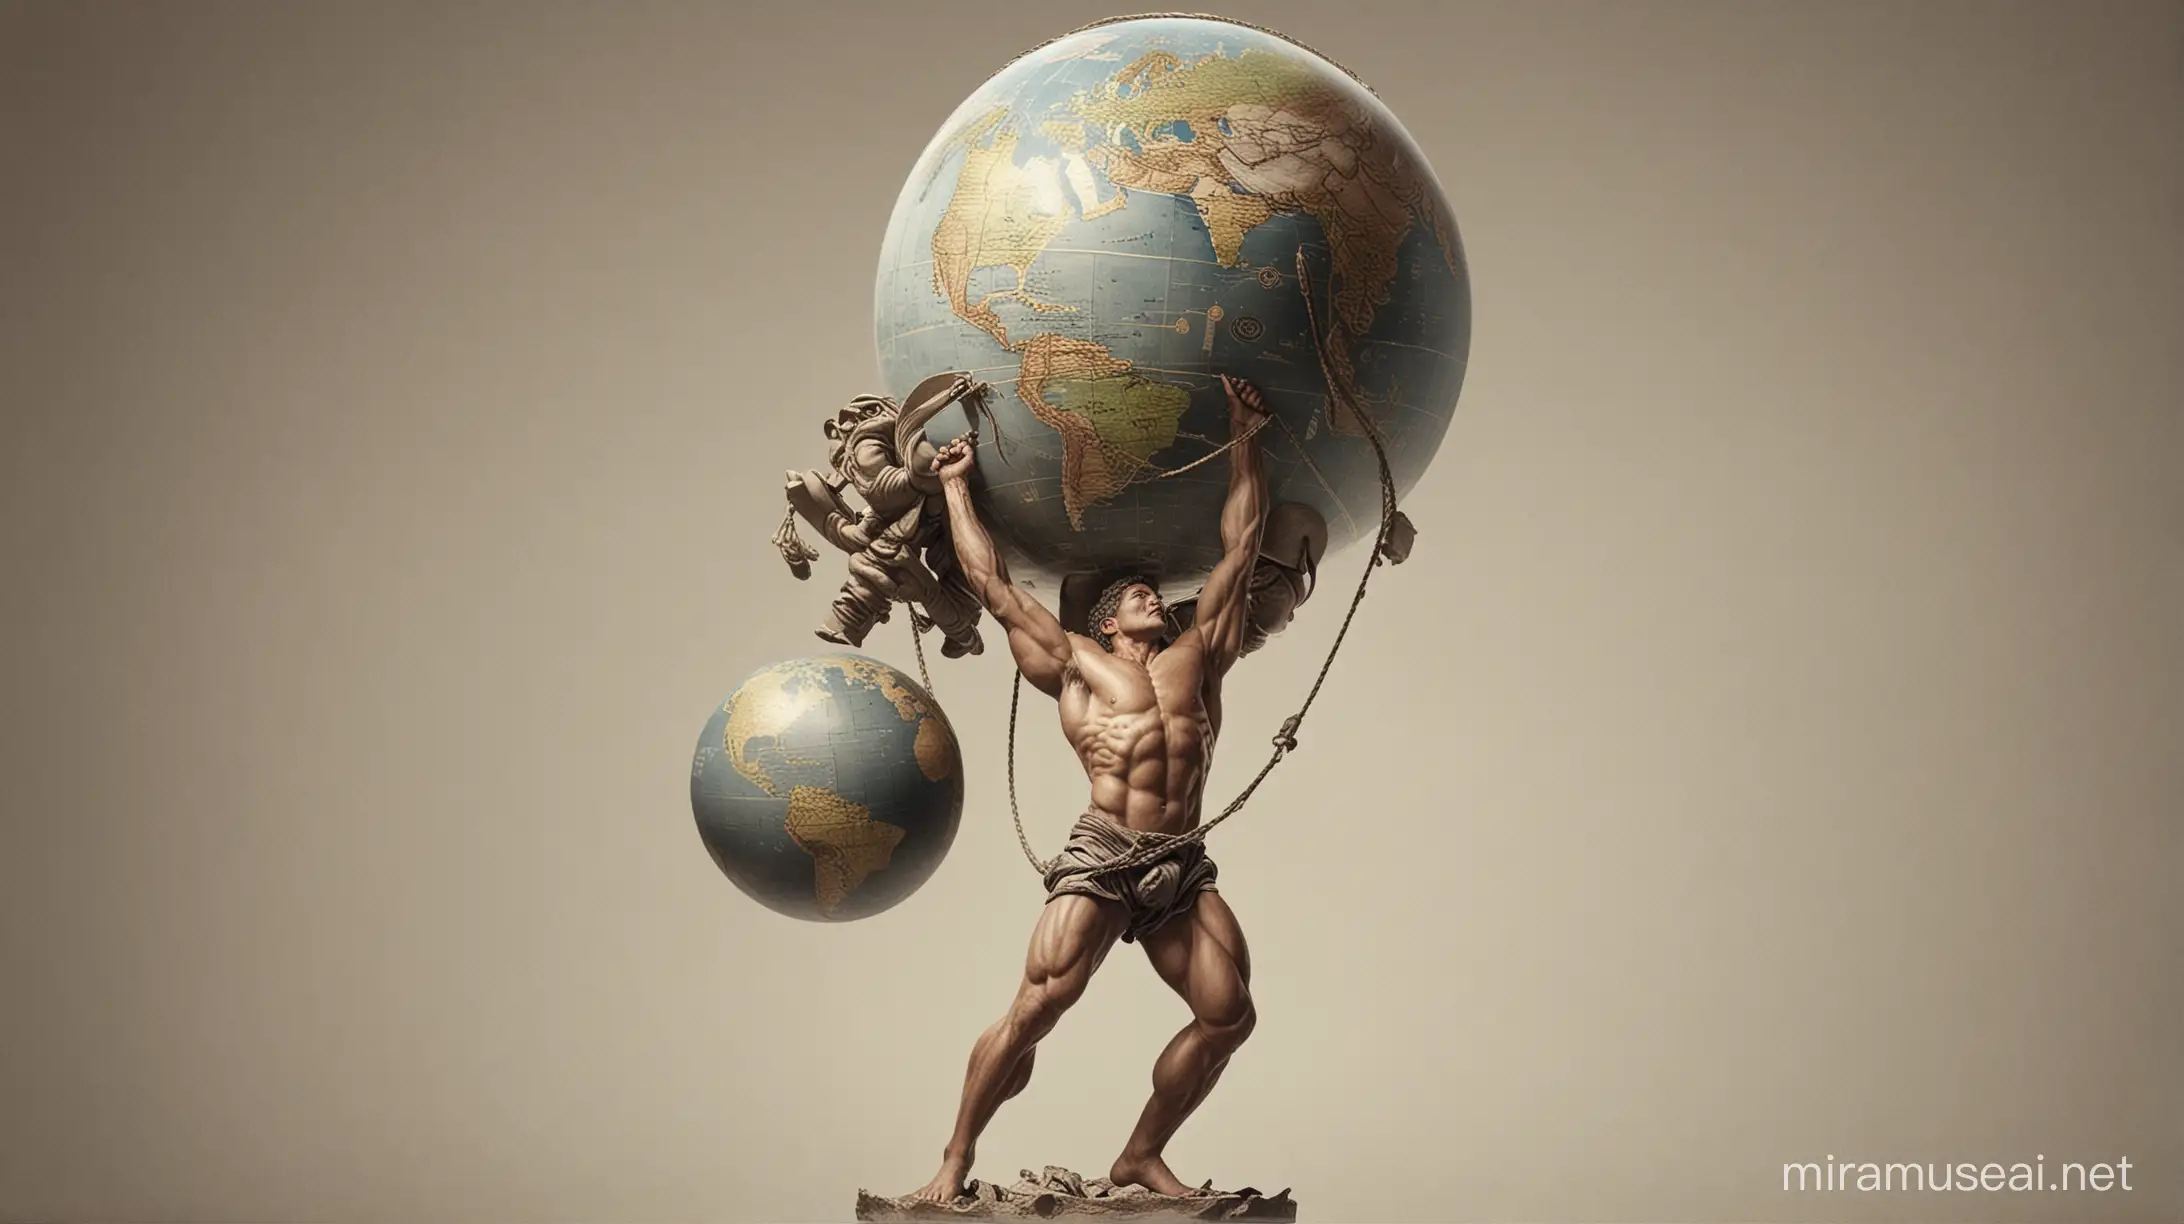 Atlas carrying the world